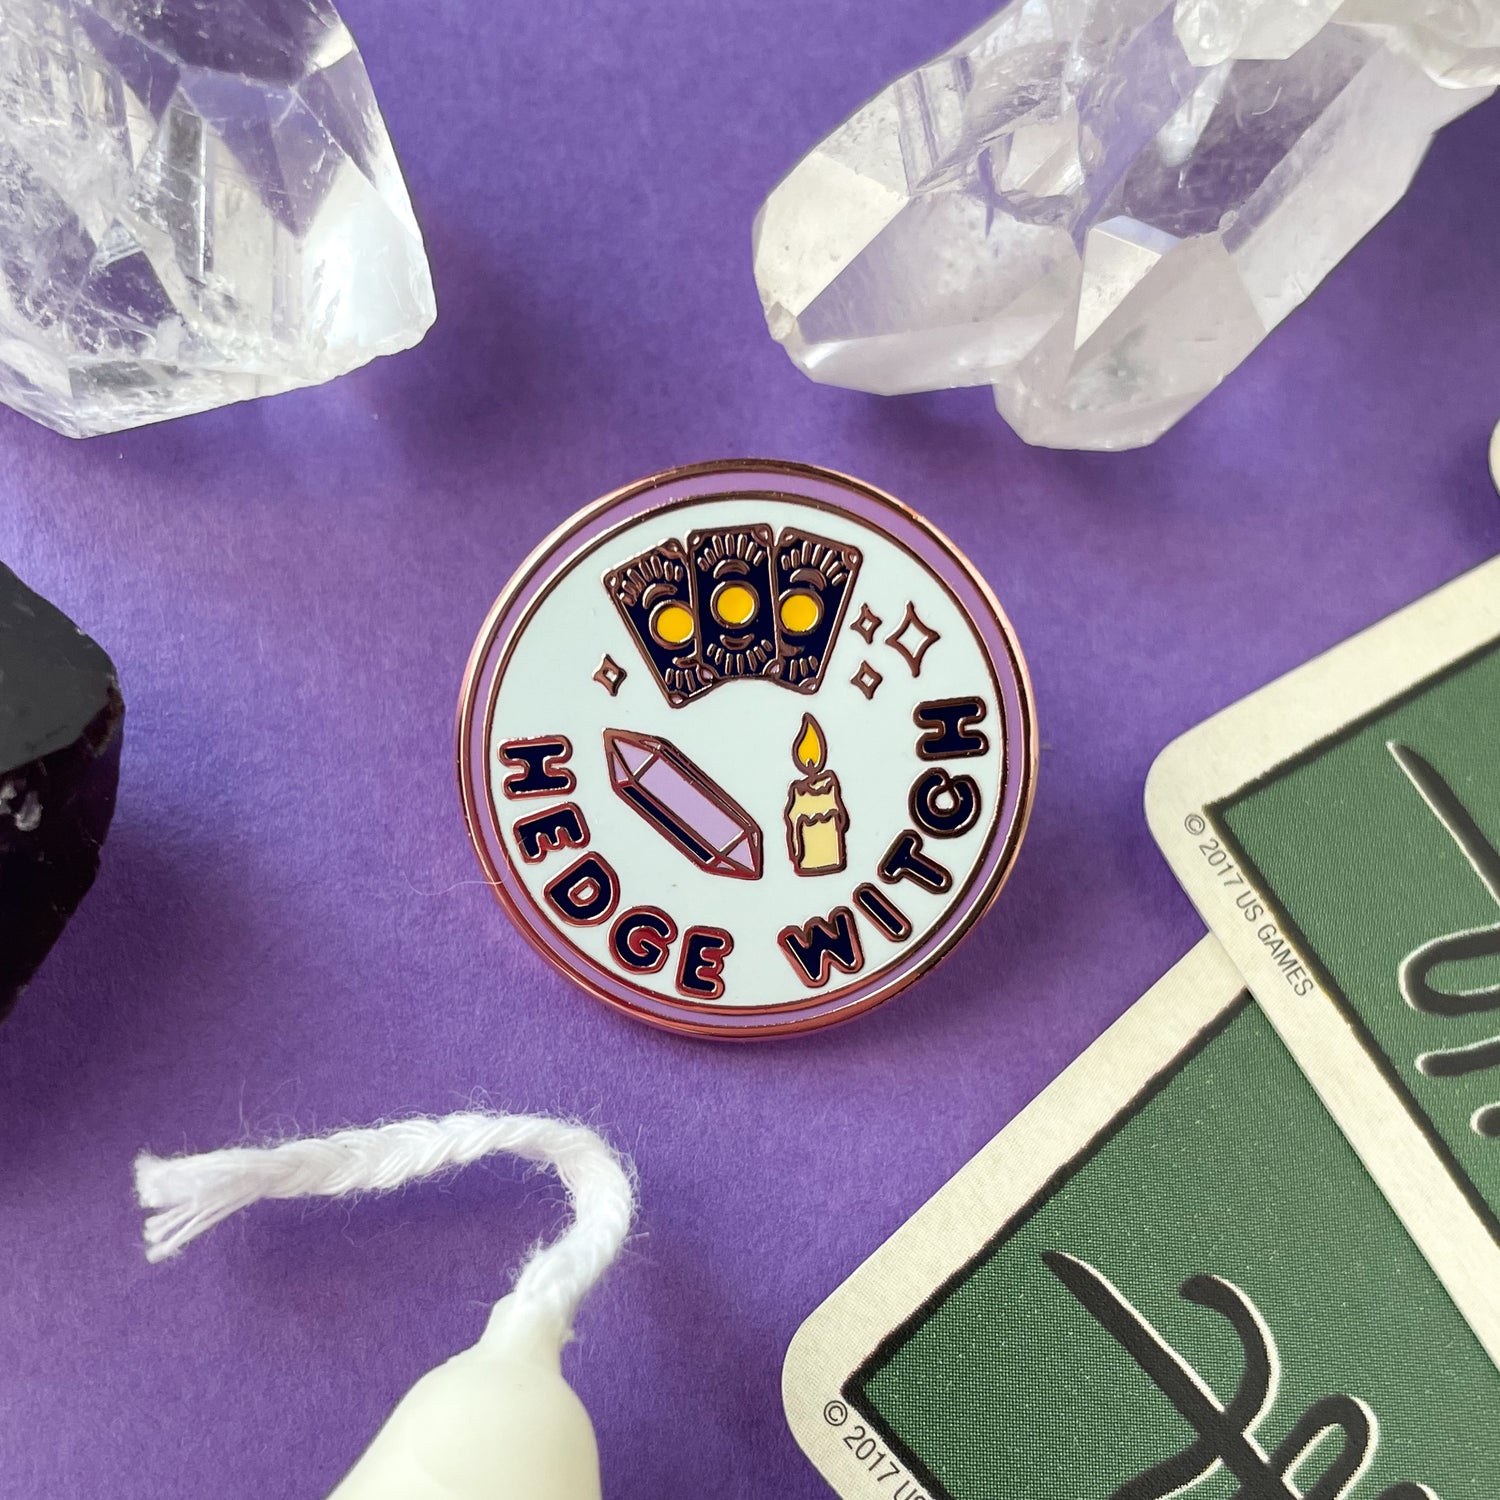 A circular enamel pin on a purple background surrounded by quartz crystals, cards and a candle. The pin reads "Hedge Witch". 